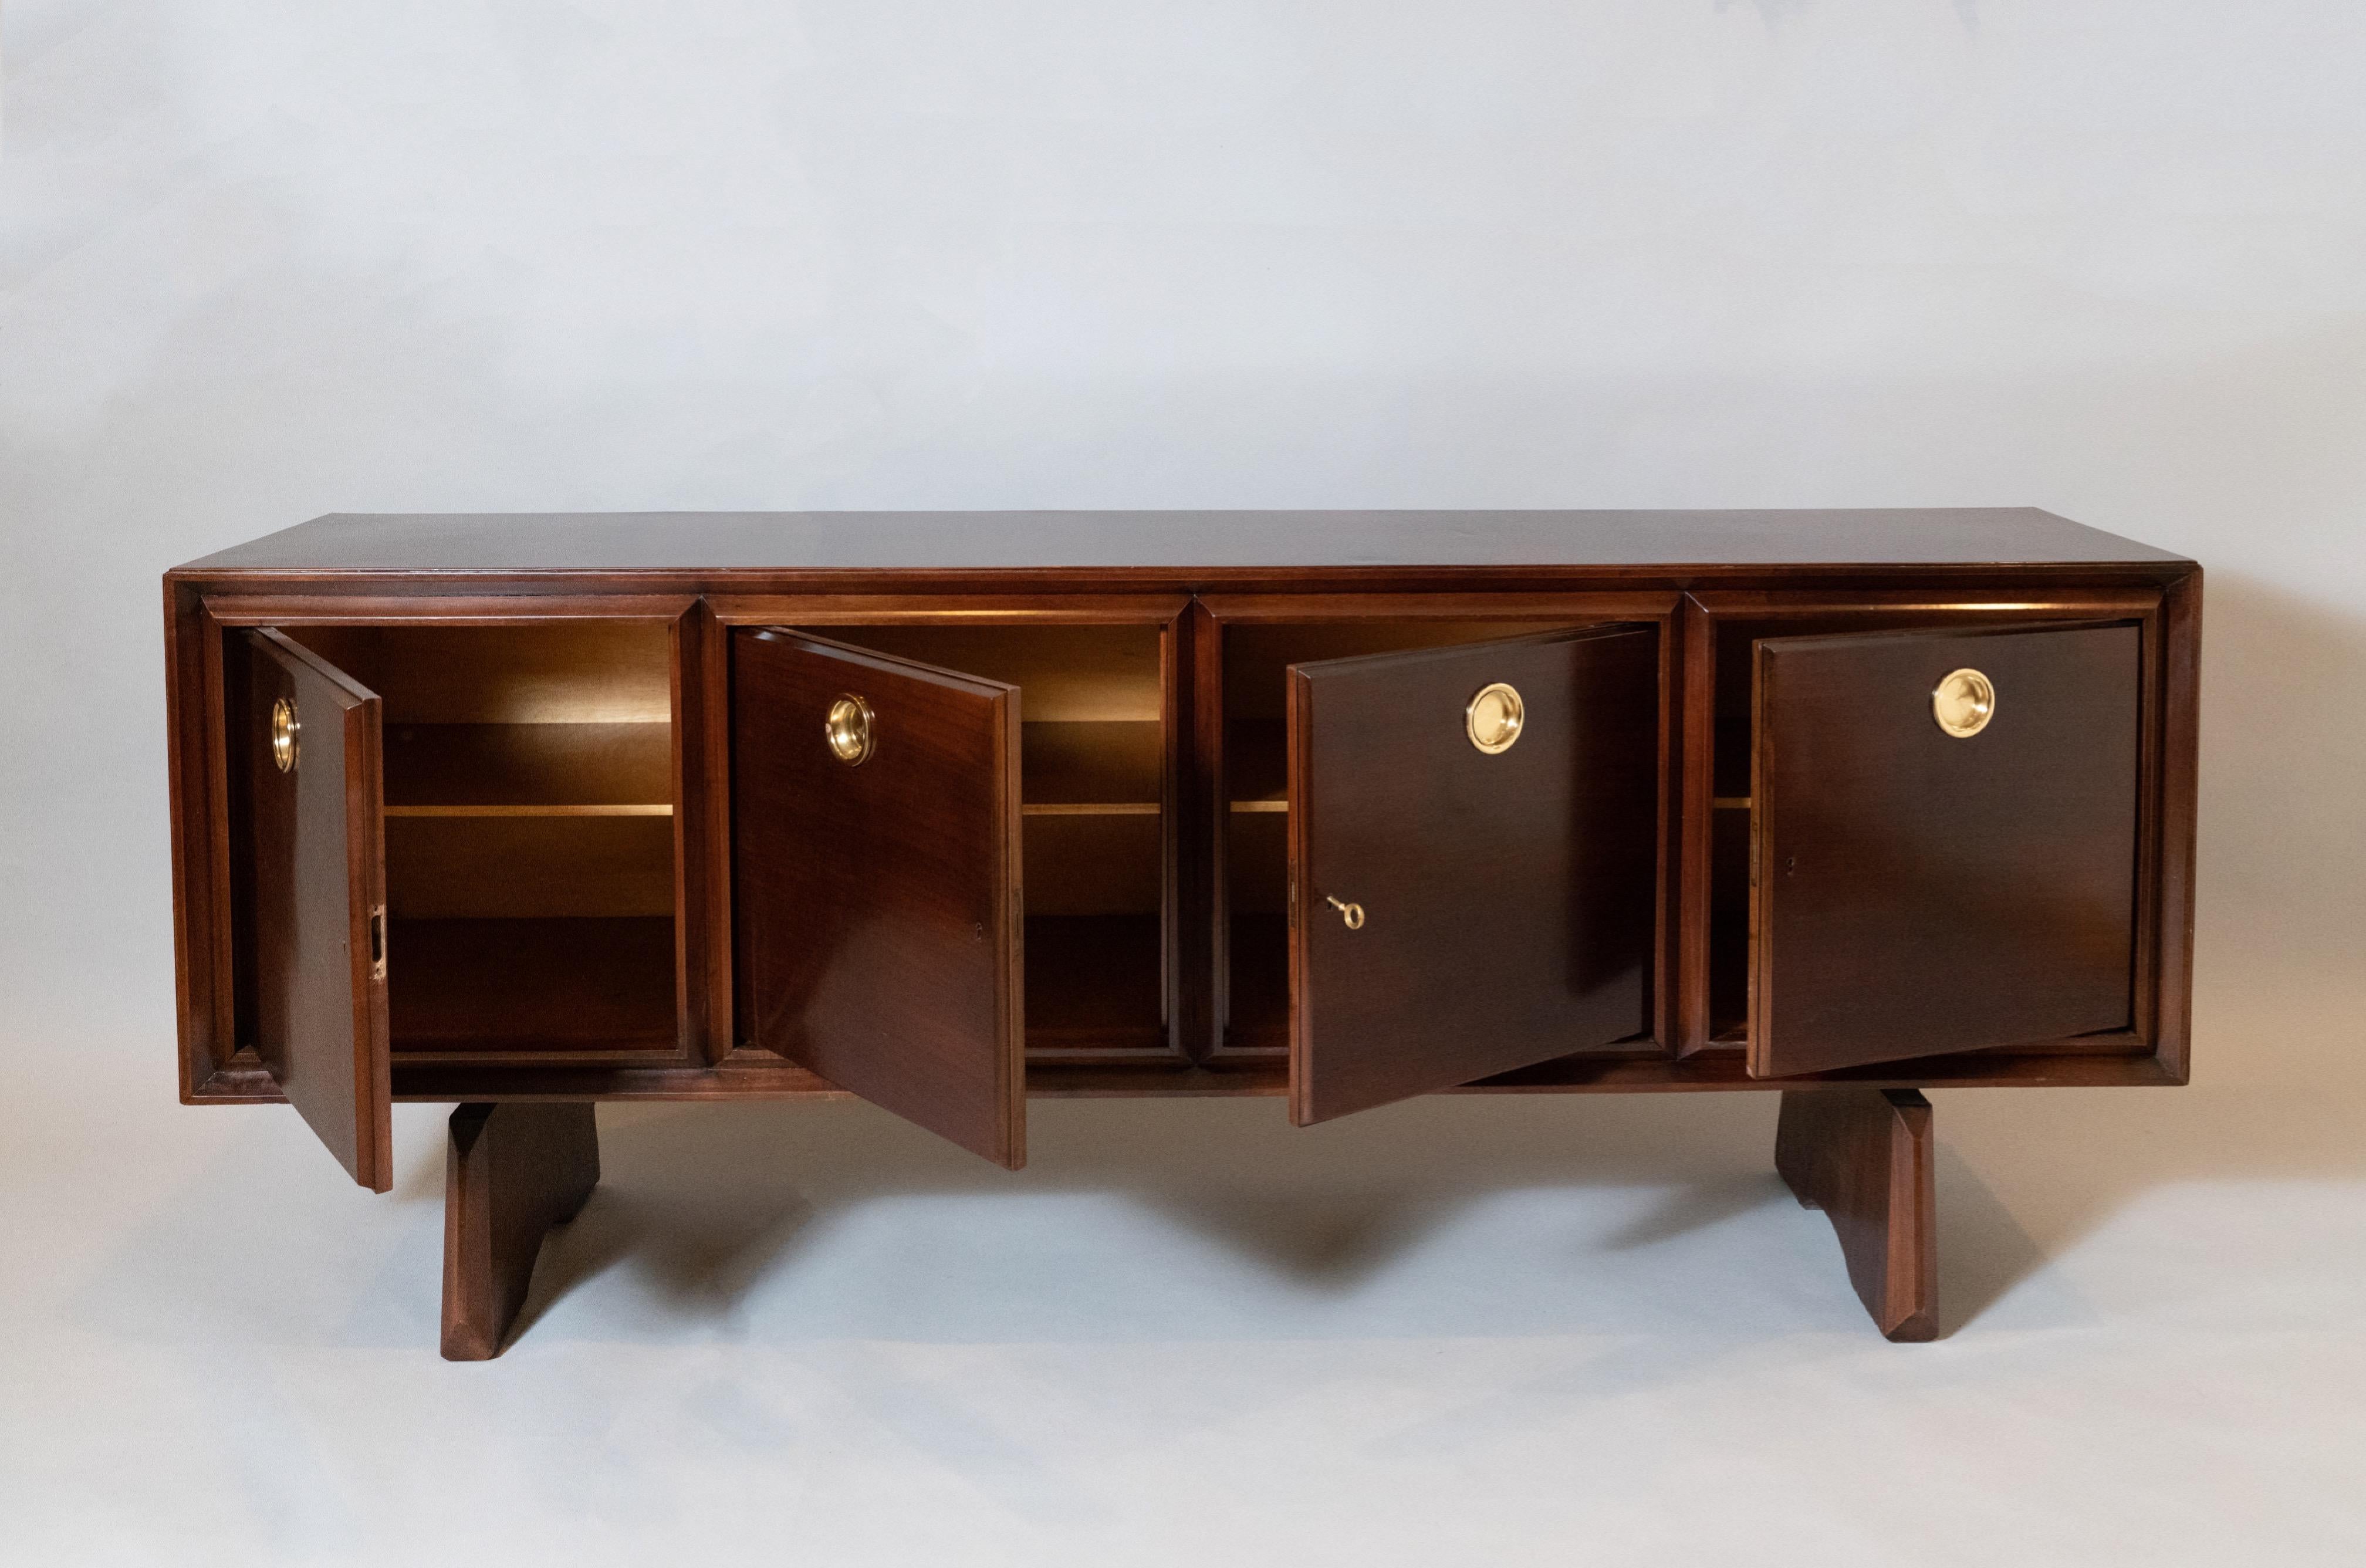 Paolo Buffa: Imposing Four-Door Cabinet in Walnut and Polished Brass, Italy 1950 For Sale 5